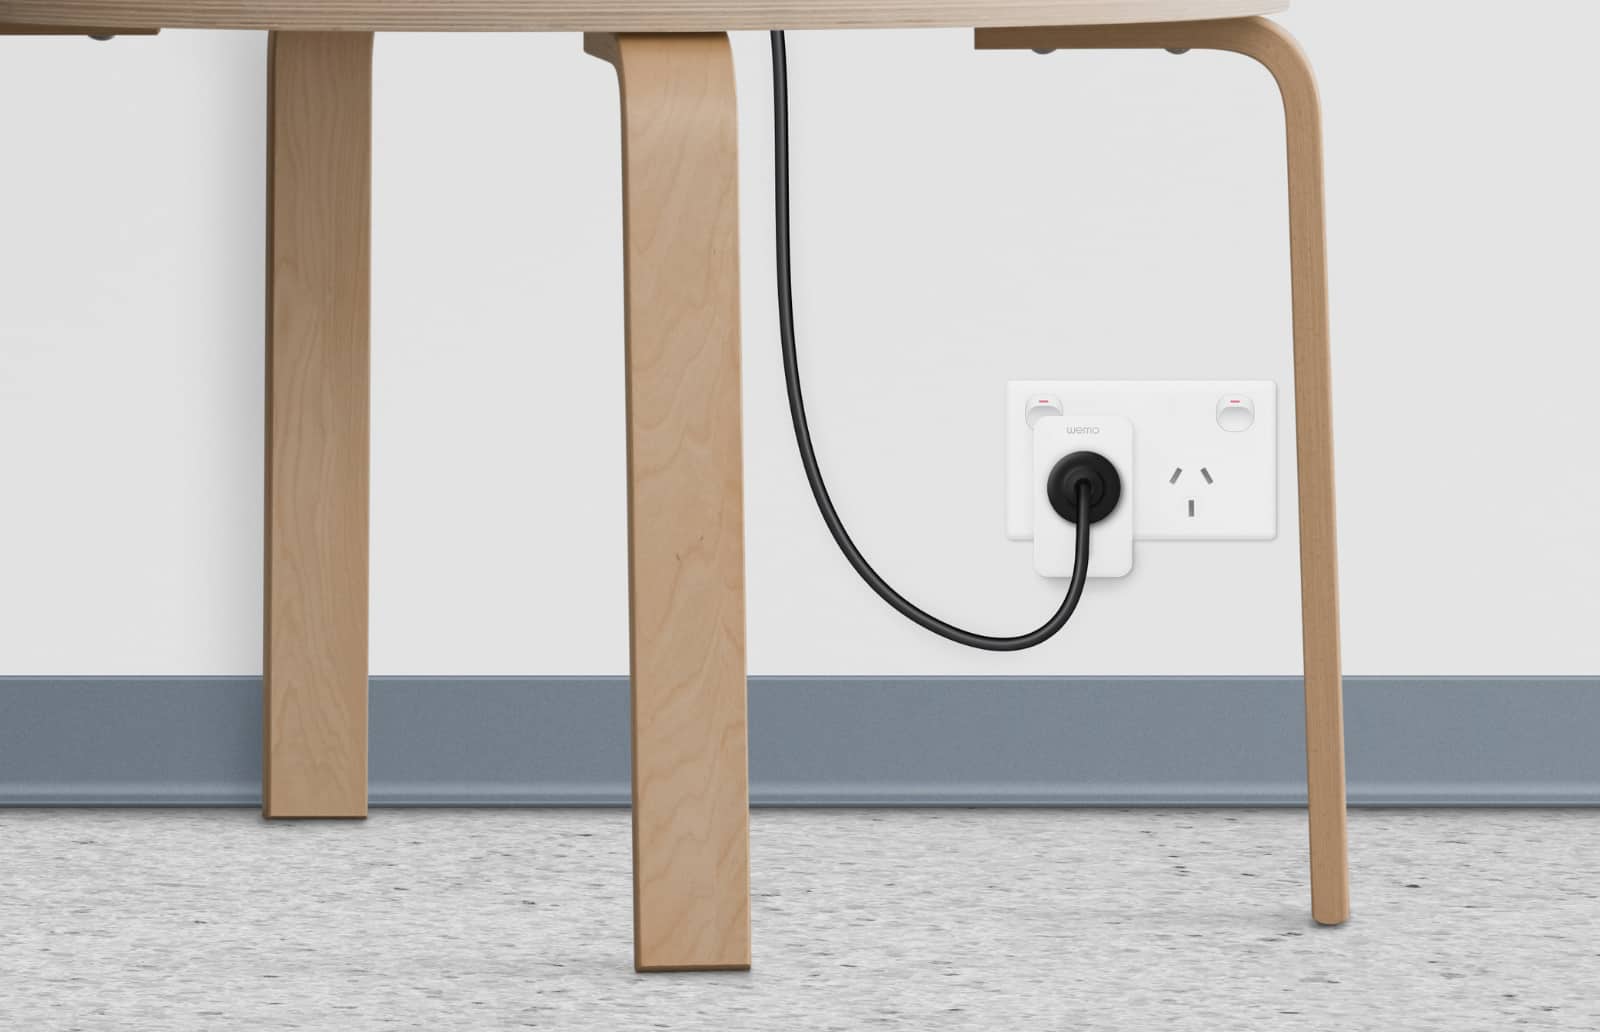 Belkin launches its first Australian smart home product in six